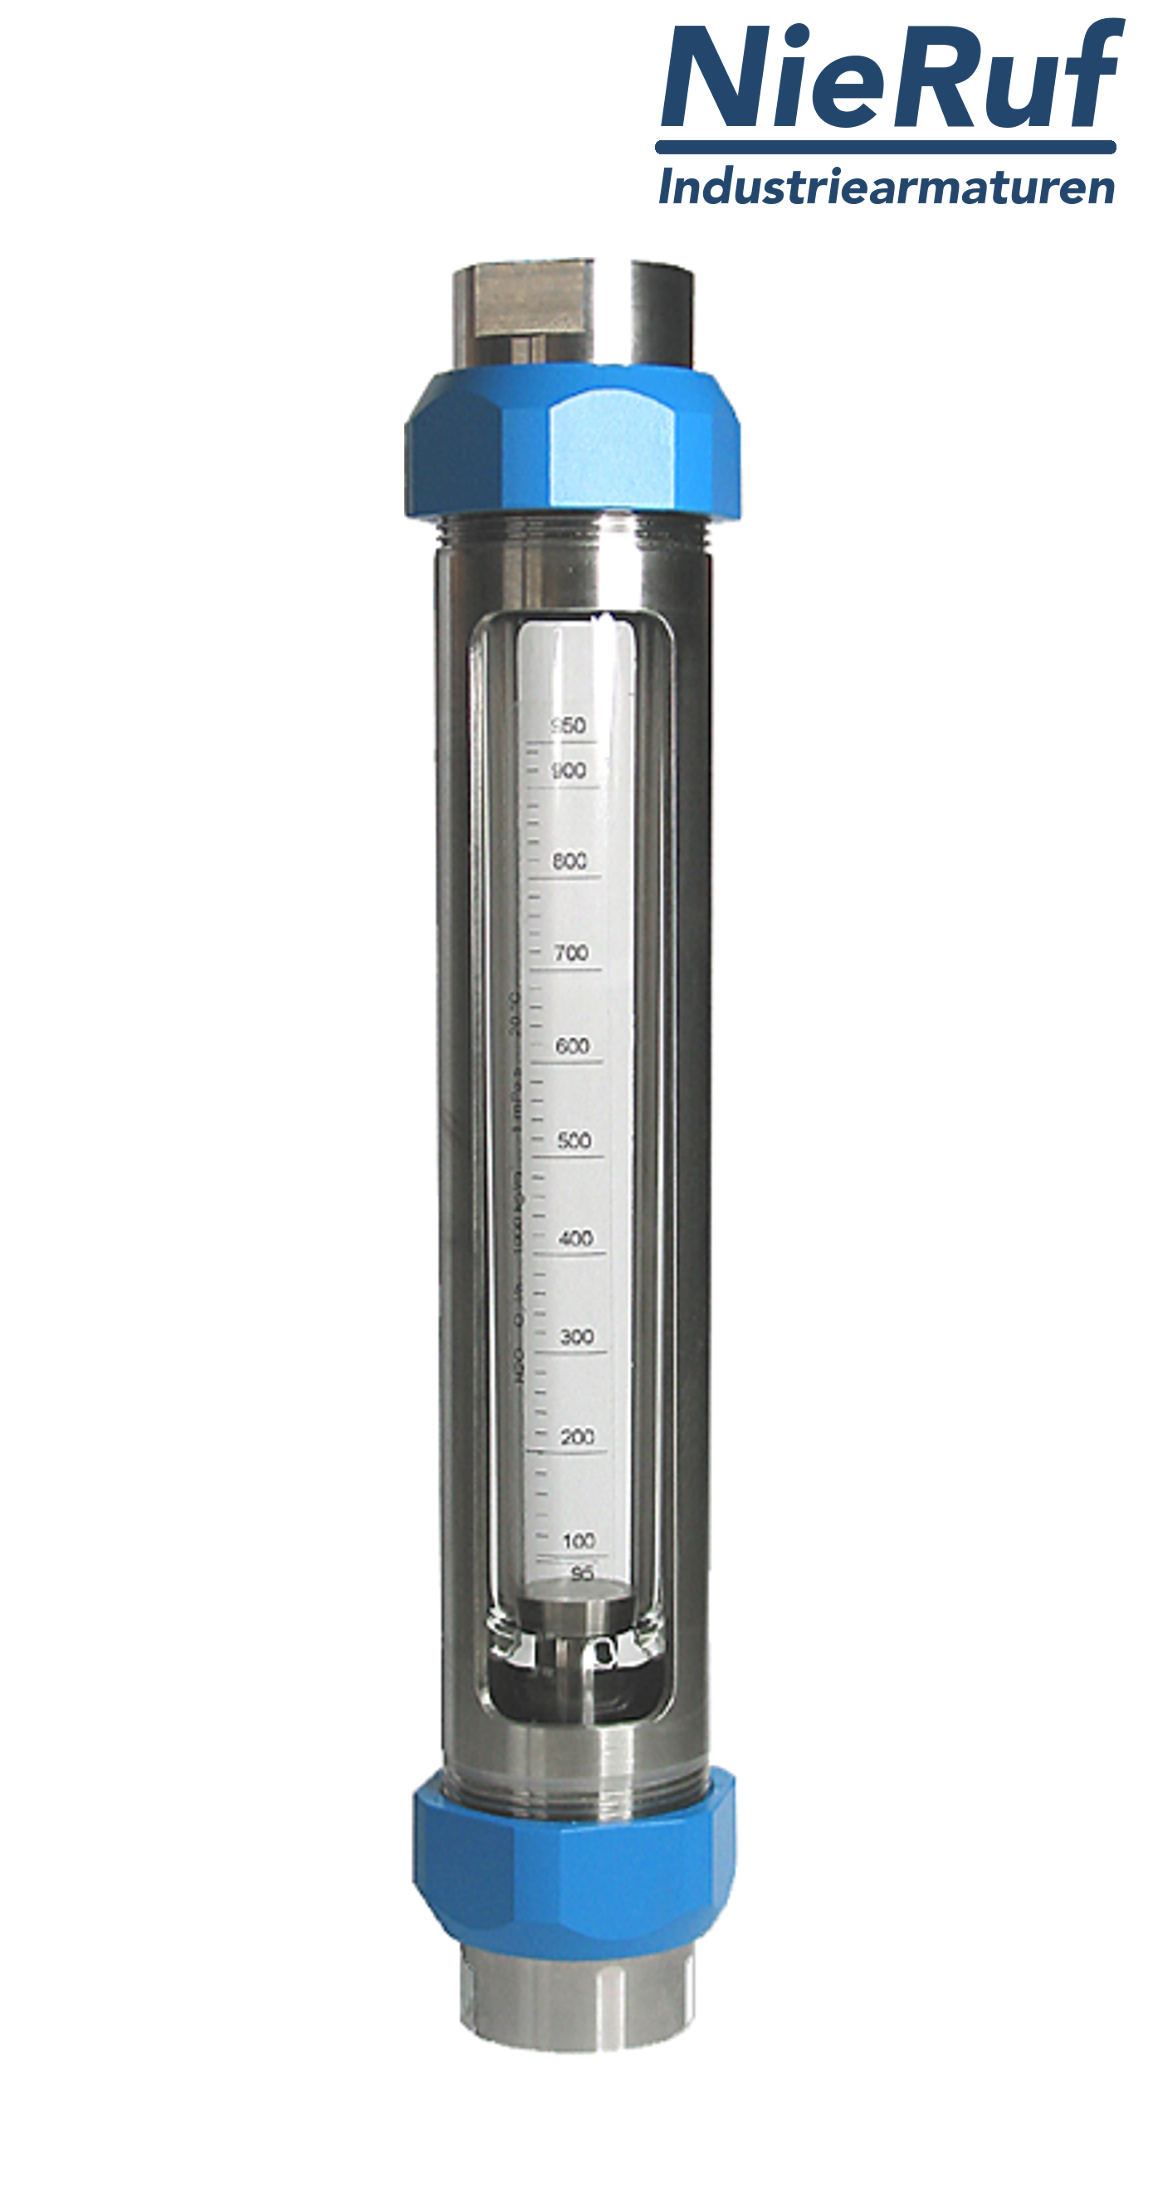 Variable area flowmeter stainless steel + borosilicate 2" inch 8000.0 - 80000.0 l/h air FKM